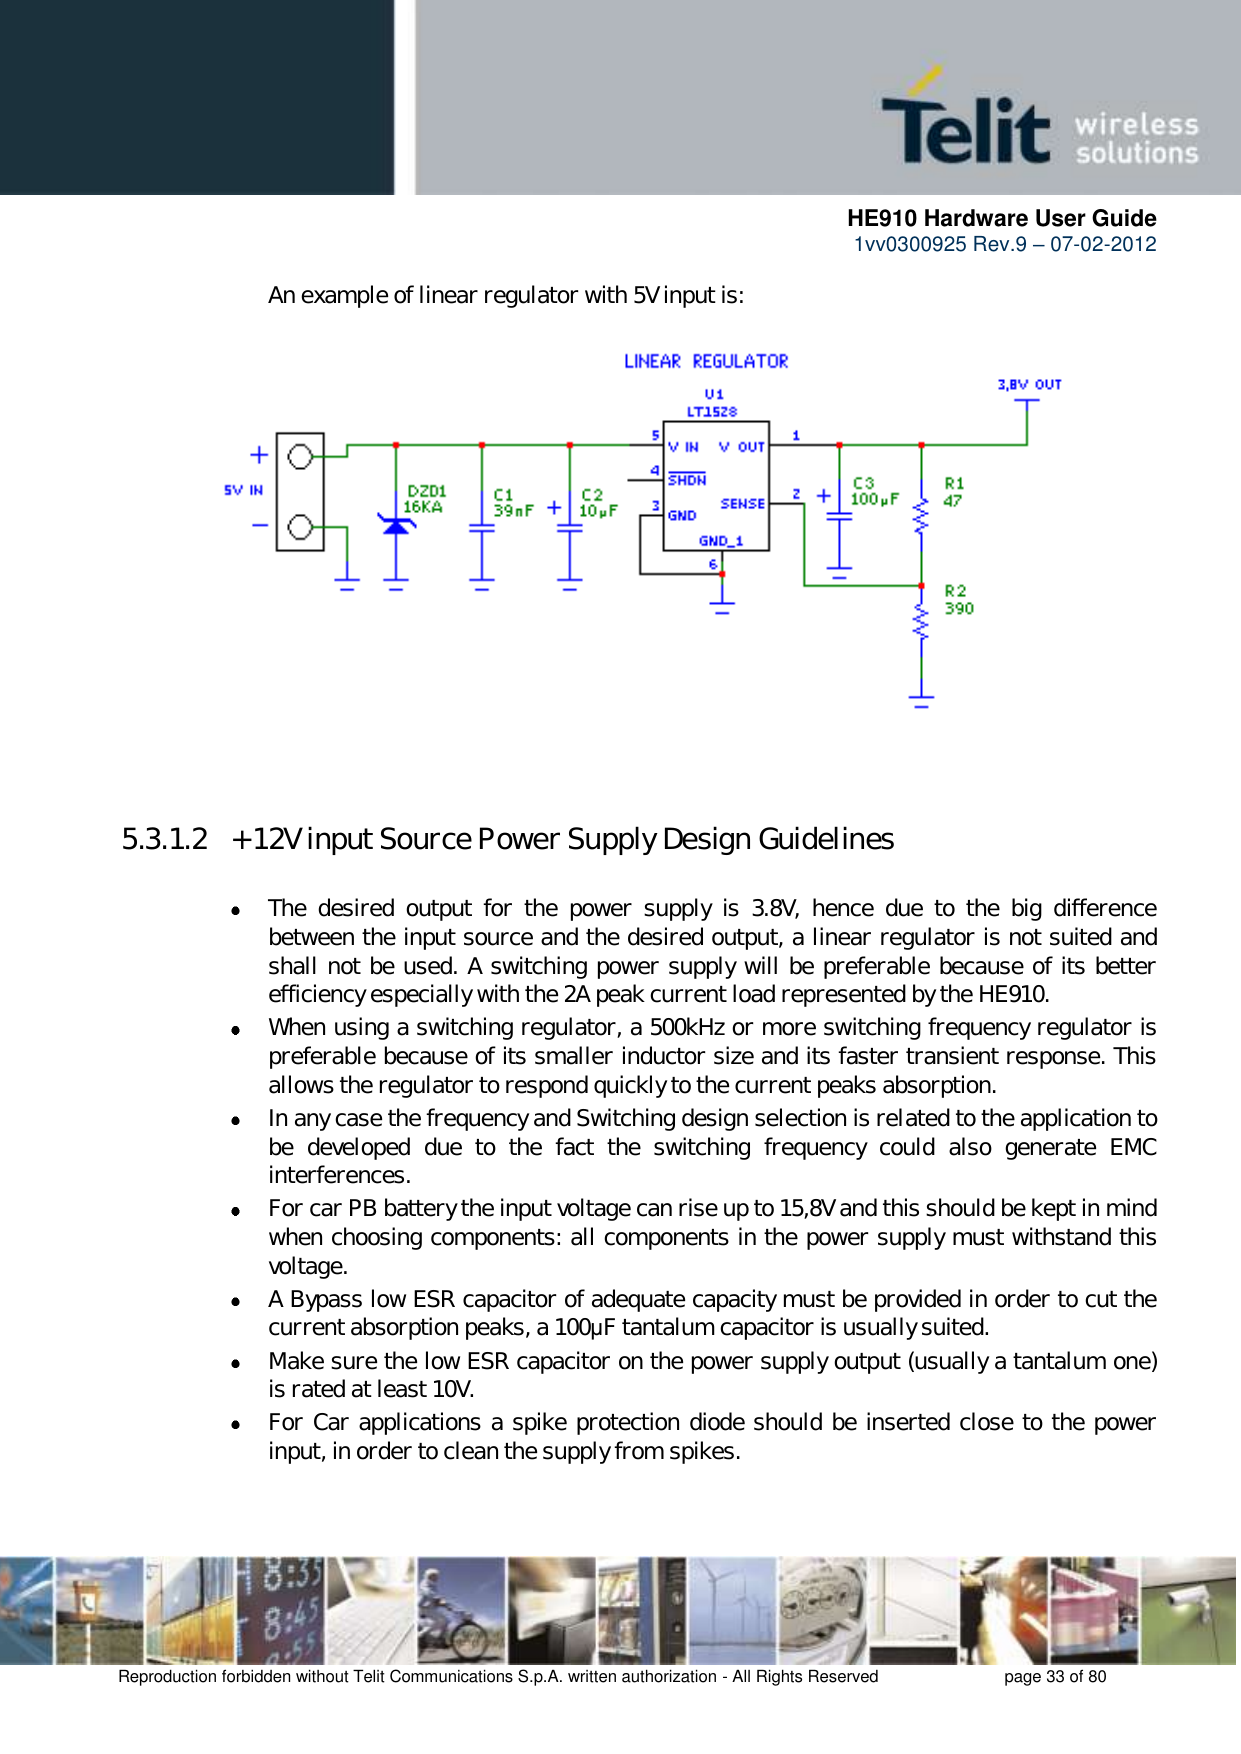      HE910 Hardware User Guide 1vv0300925 Rev.9 – 07-02-2012    Reproduction forbidden without Telit Communications S.p.A. written authorization - All Rights Reserved    page 33 of 80  An example of linear regulator with 5V input is:      5.3.1.2  + 12V input Source Power Supply Design Guidelines   The  desired  output  for  the  power  supply  is  3.8V,  hence  due  to  the  big  difference between the input source and the desired output, a linear regulator is not suited and shall not be used. A switching power supply will be preferable because of its better efficiency especially with the 2A peak current load represented by the HE910.  When using a switching regulator, a 500kHz or more switching frequency regulator is preferable because of its smaller inductor size and its faster transient response. This allows the regulator to respond quickly to the current peaks absorption.   In any case the frequency and Switching design selection is related to the application to be  developed  due  to  the  fact  the  switching  frequency  could  also  generate  EMC interferences.  For car PB battery the input voltage can rise up to 15,8V and this should be kept in mind when choosing components: all components in the power supply must withstand this voltage.  A Bypass low ESR capacitor of adequate capacity must be provided in order to cut the current absorption peaks, a 100μF tantalum capacitor is usually suited.  Make sure the low ESR capacitor on the power supply output (usually a tantalum one) is rated at least 10V.  For Car applications a spike protection diode should be inserted close to the power input, in order to clean the supply from spikes.  